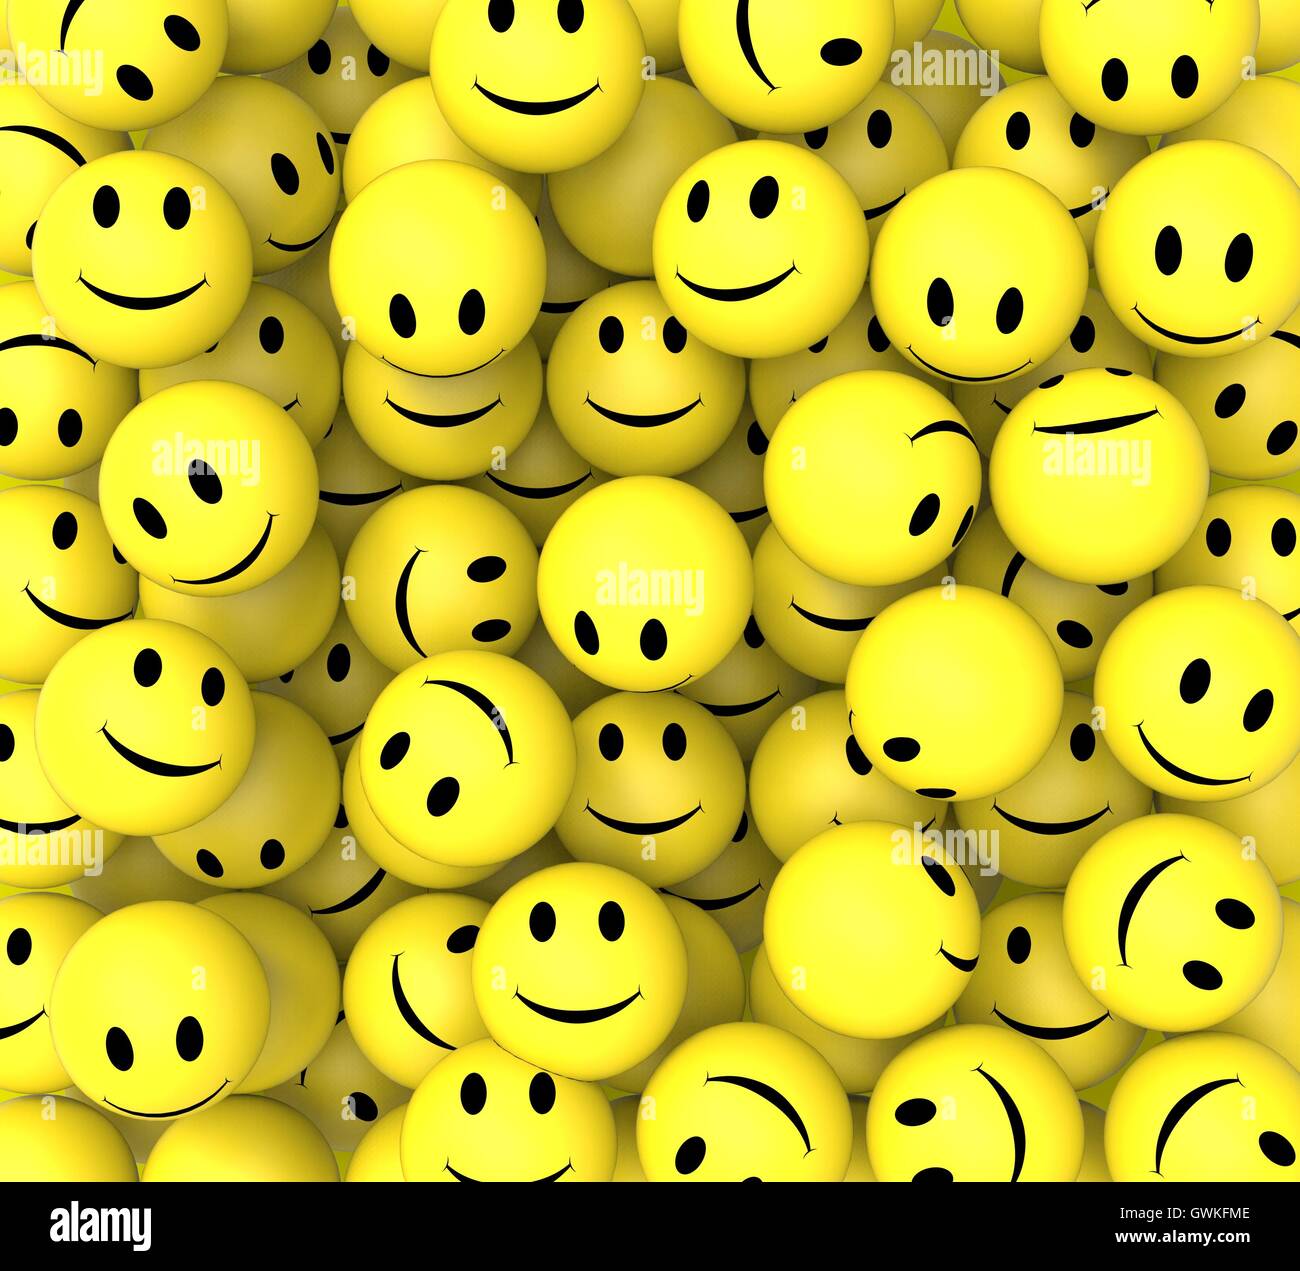 Smileys Show Happy Cheerful Faces Stock Photo